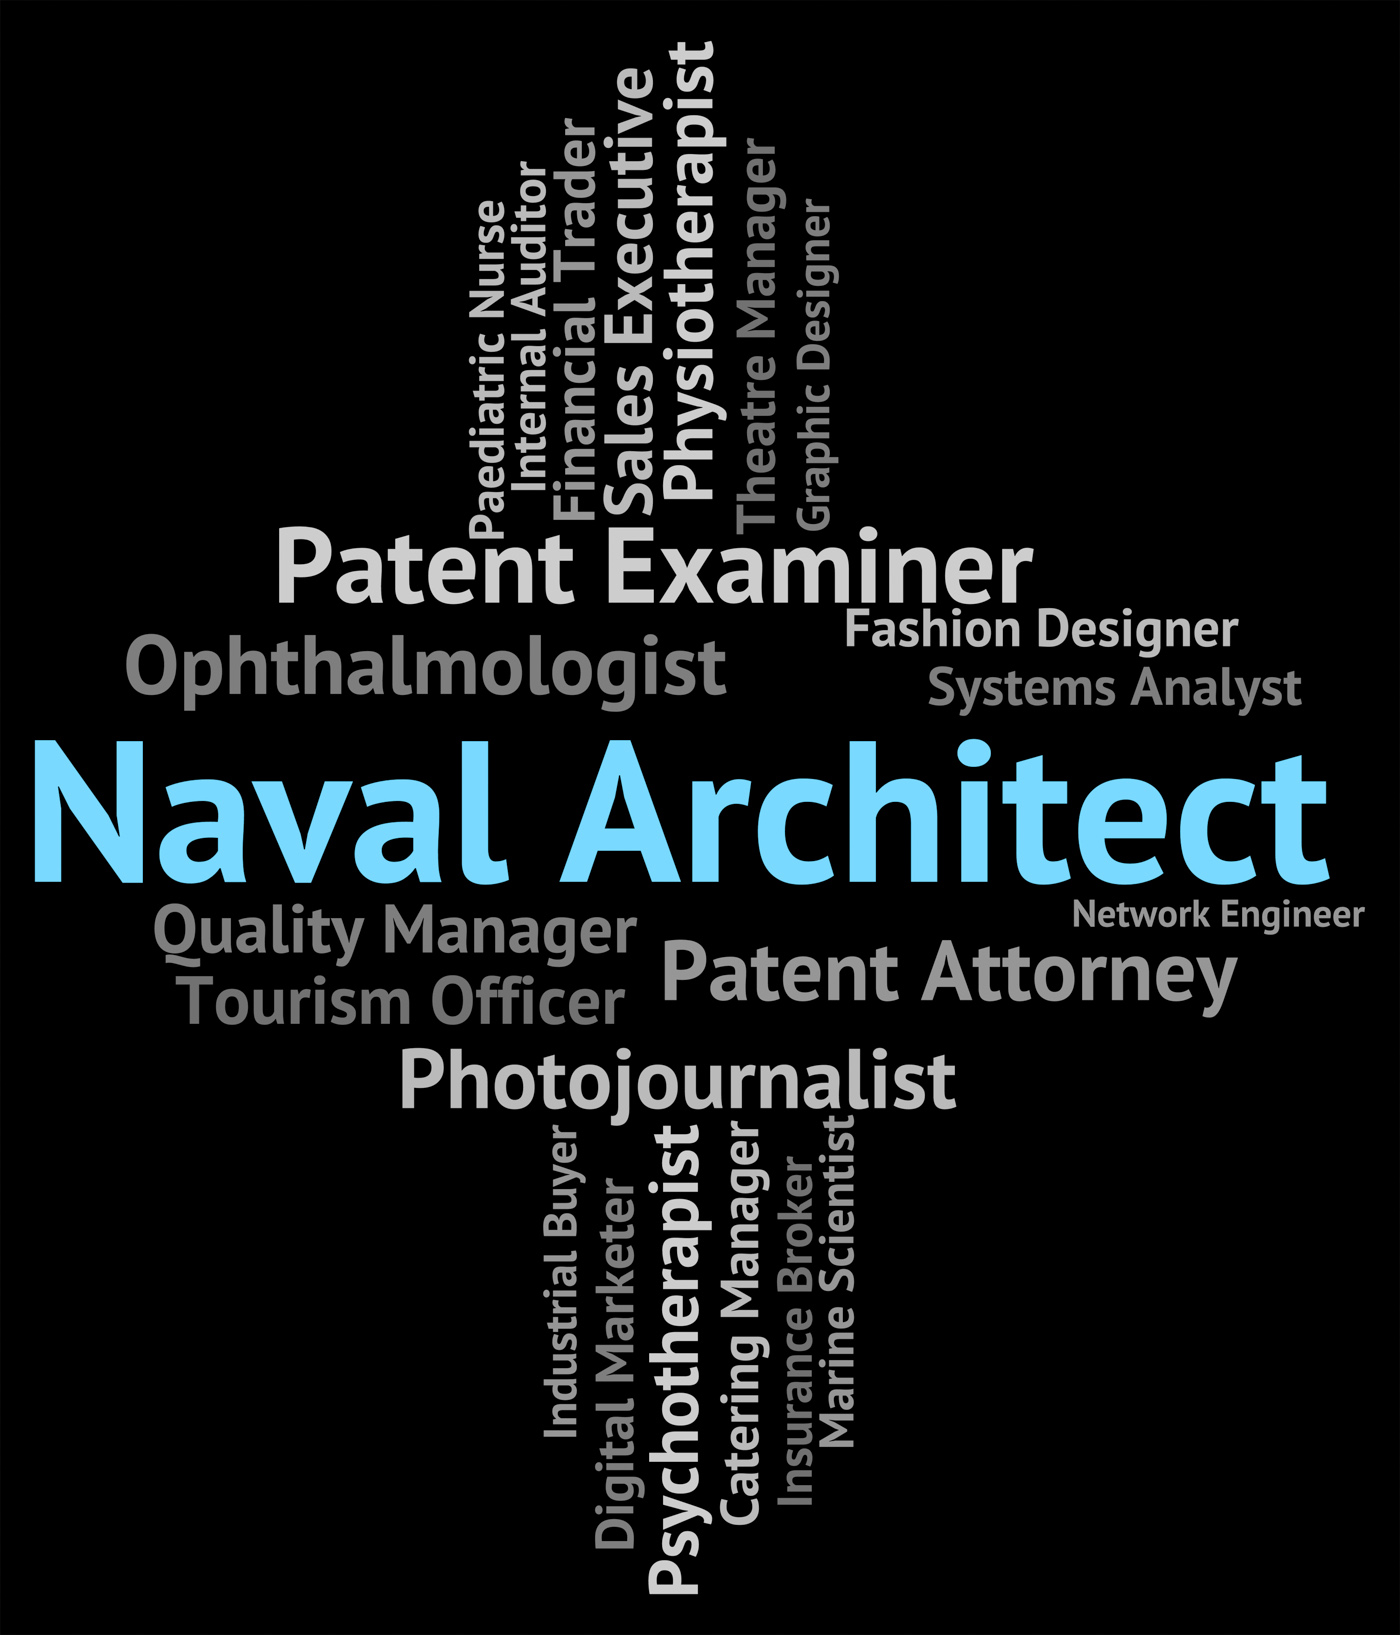 Naval architect represents position nautical and text photo